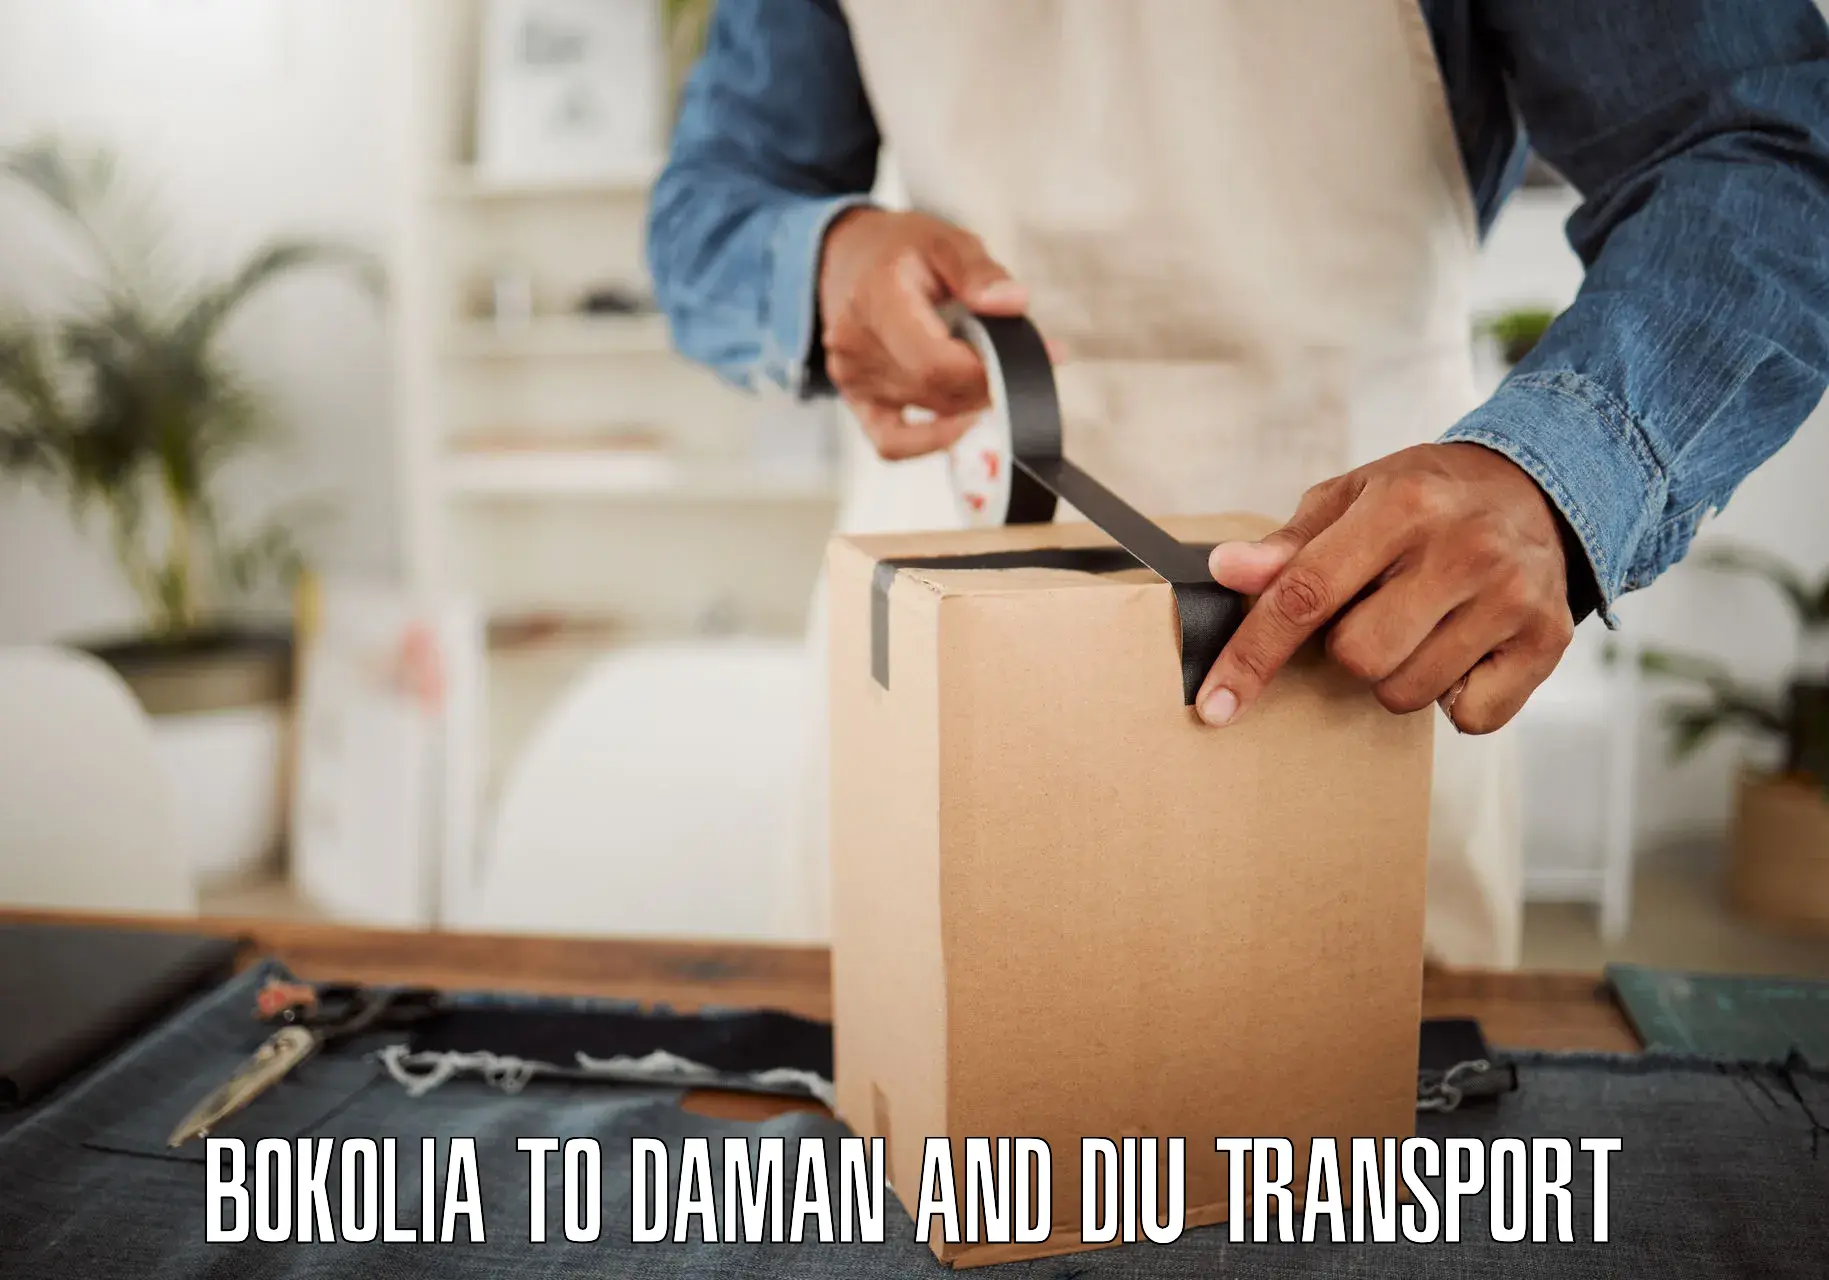 Vehicle transport services Bokolia to Daman and Diu